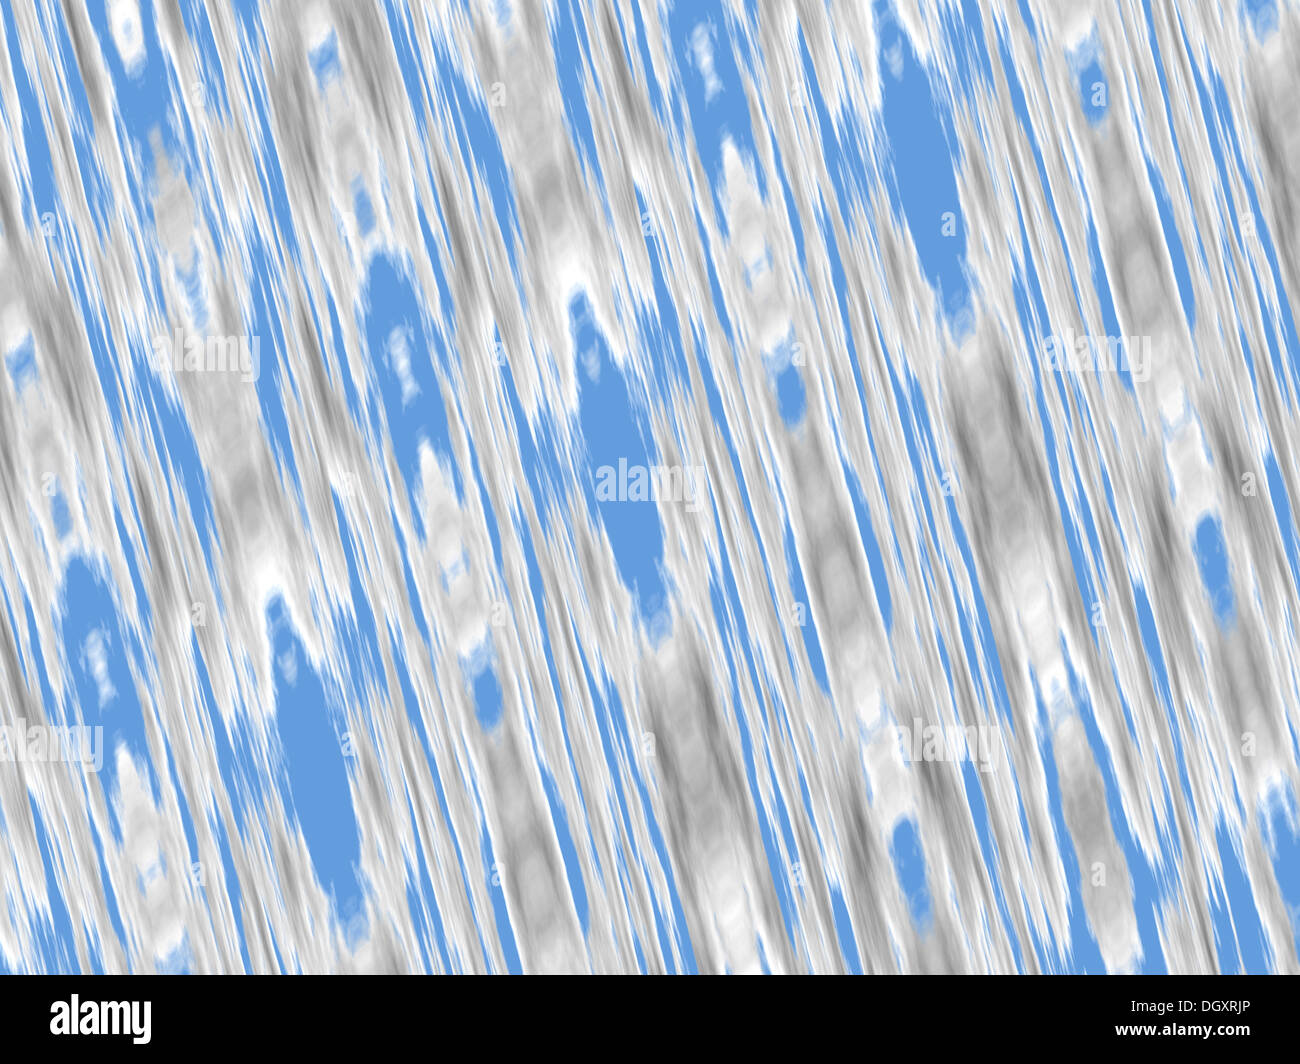 Abstract artistic decorative background dynamic pattern Stock Photo